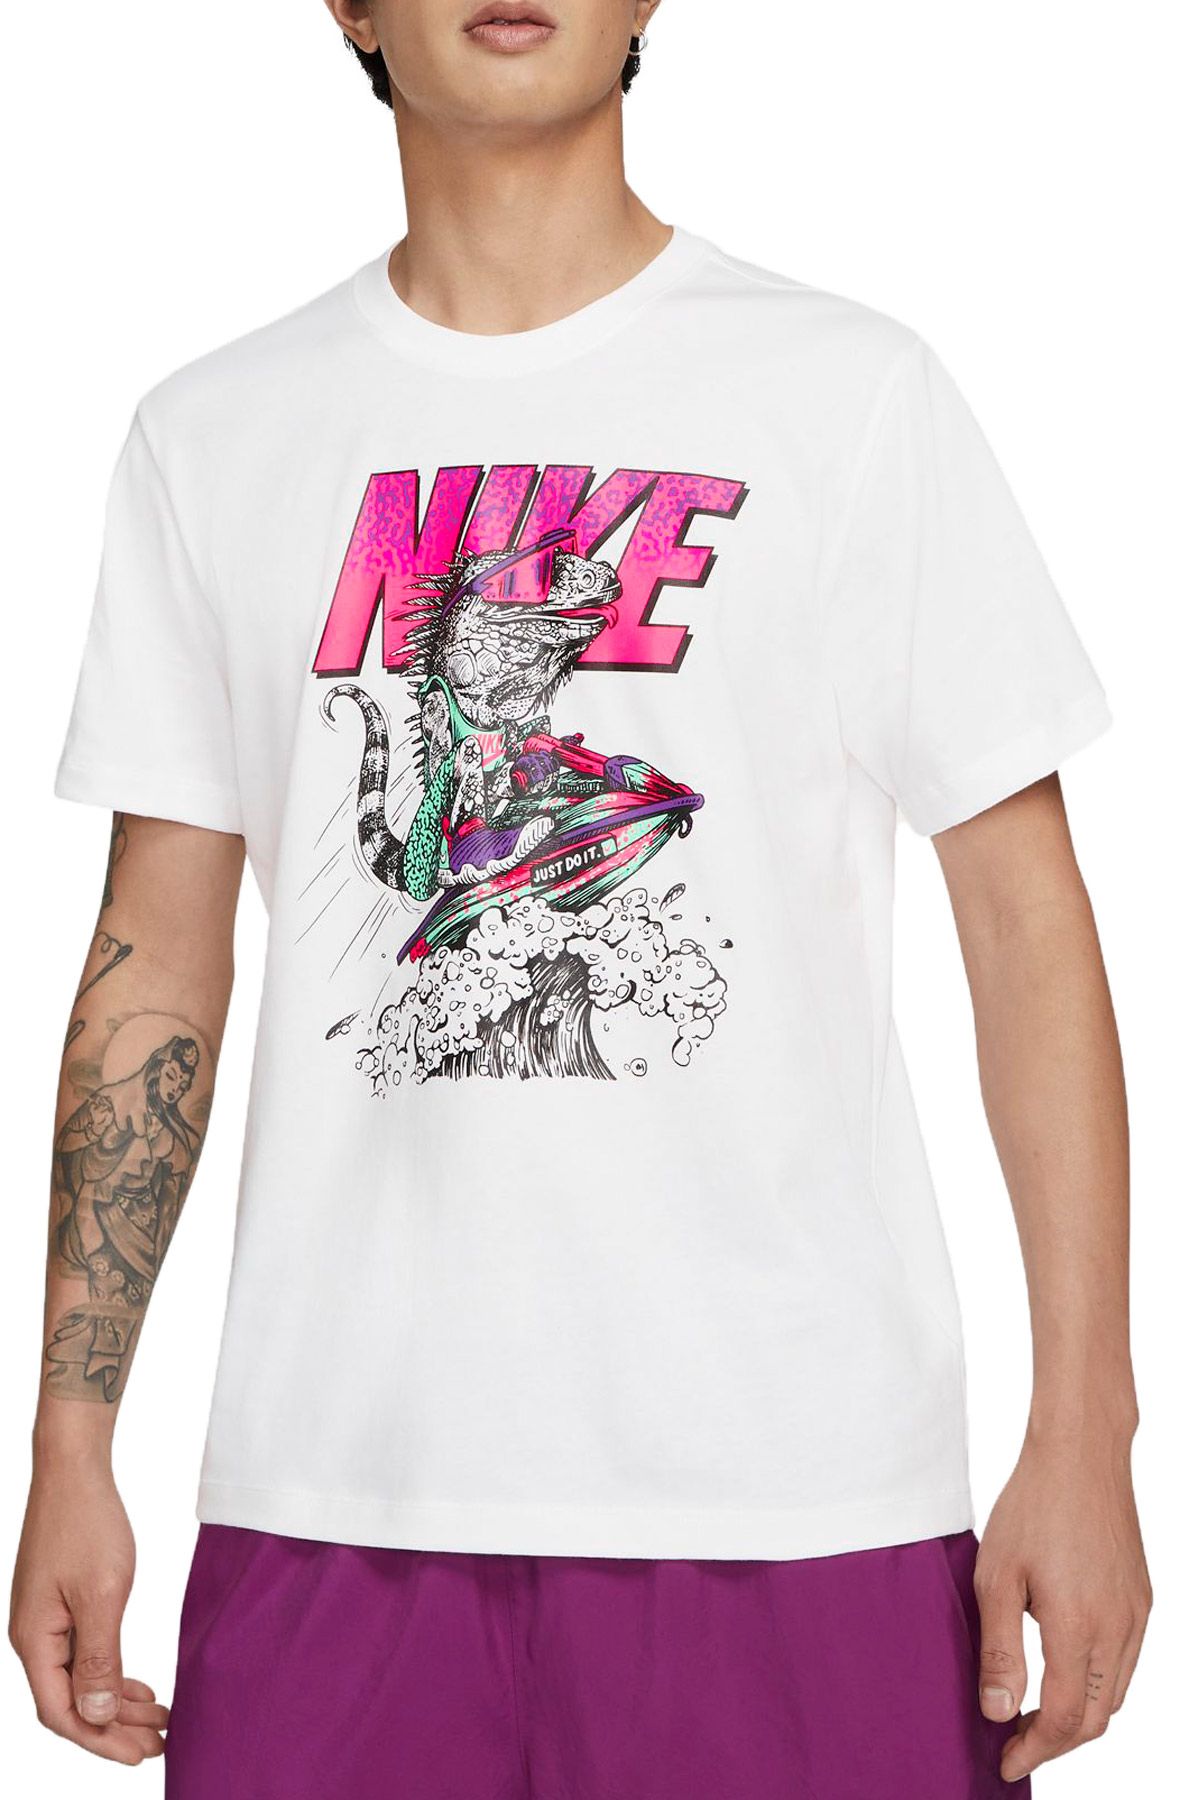  Nike Boy's Sportswear Just Do It. T-Shirt, Shirts for Boys with  Classic Fit, Black/Volt, S : Clothing, Shoes & Jewelry